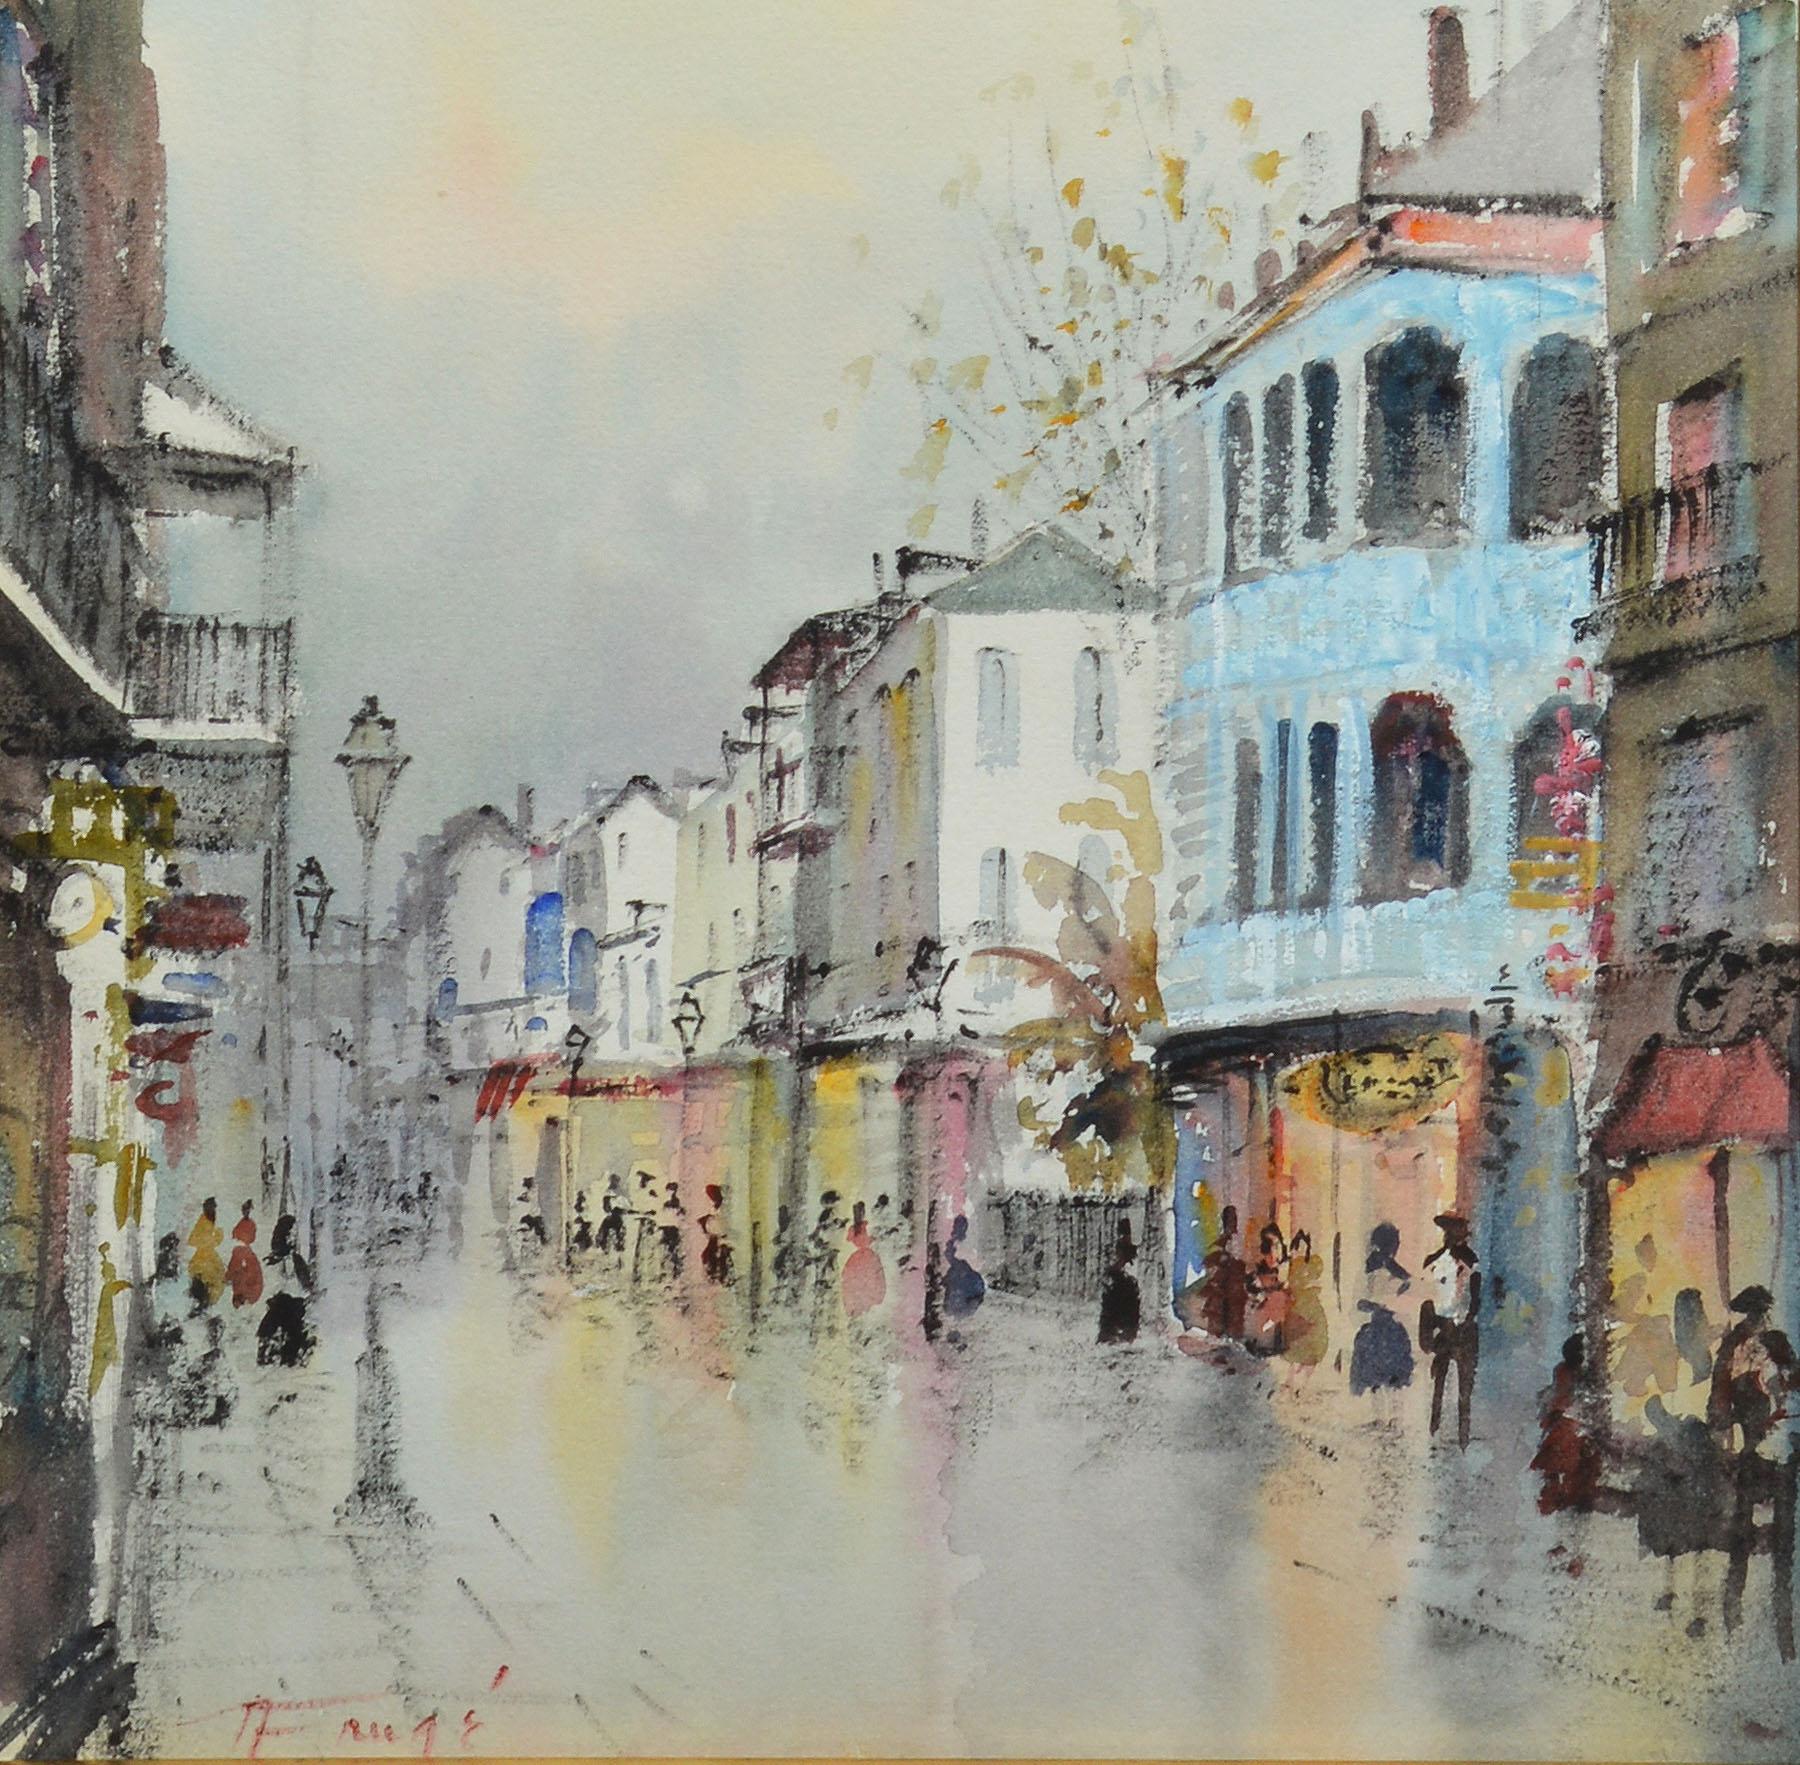 Antique cityscape painting of New Orleans by Nestor Fruge  (1914 - 2011).  Watercolor and gouache on paper, circa 1950.  Signed.  Displayed in a period wood frame.  Image, 11